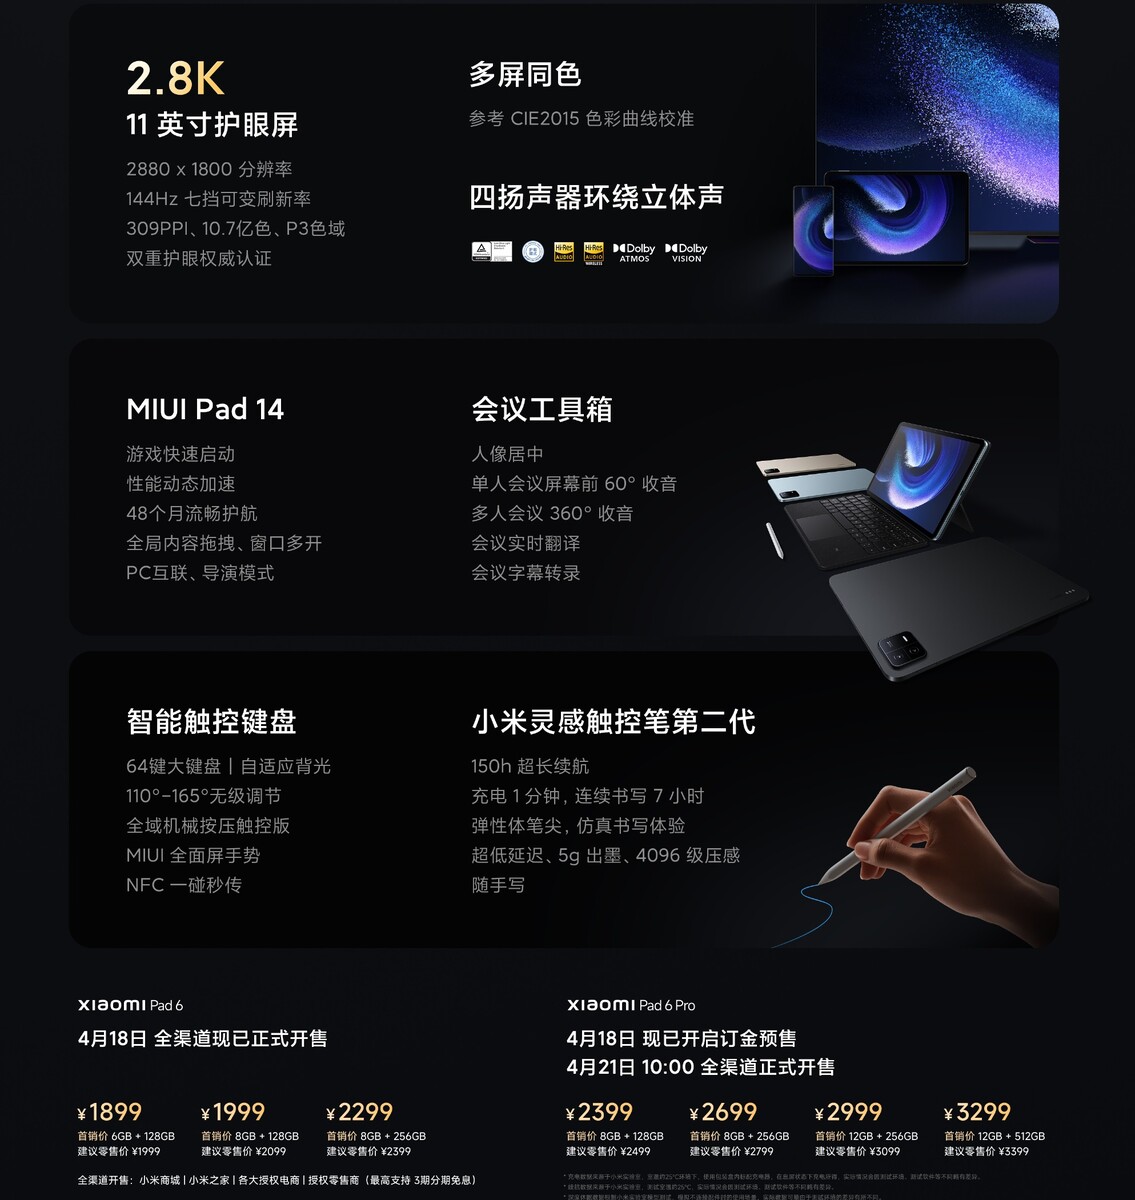 Xiaomi Pad 6, Pad 6 Pro Launched: Check Specs, Features, Price Of Flagship  Android Tablets - Gizbot News